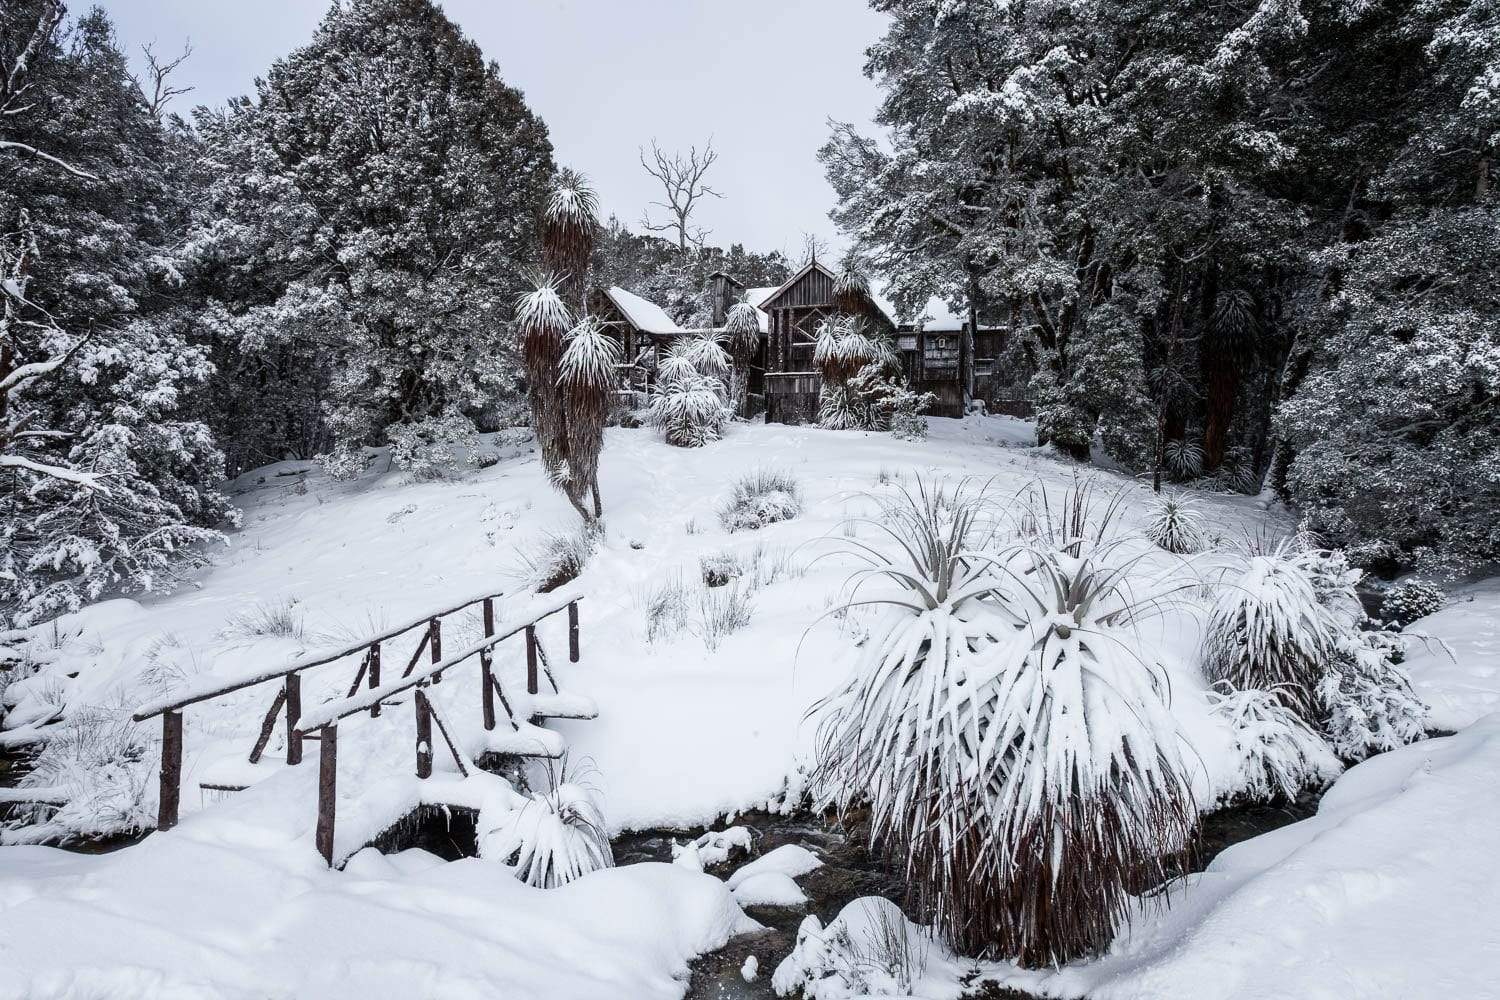 Area with grass, bushes, trees, and a house on a snowy land, Waldheim Chalet in snow, Cradle Mountain, Tasmania